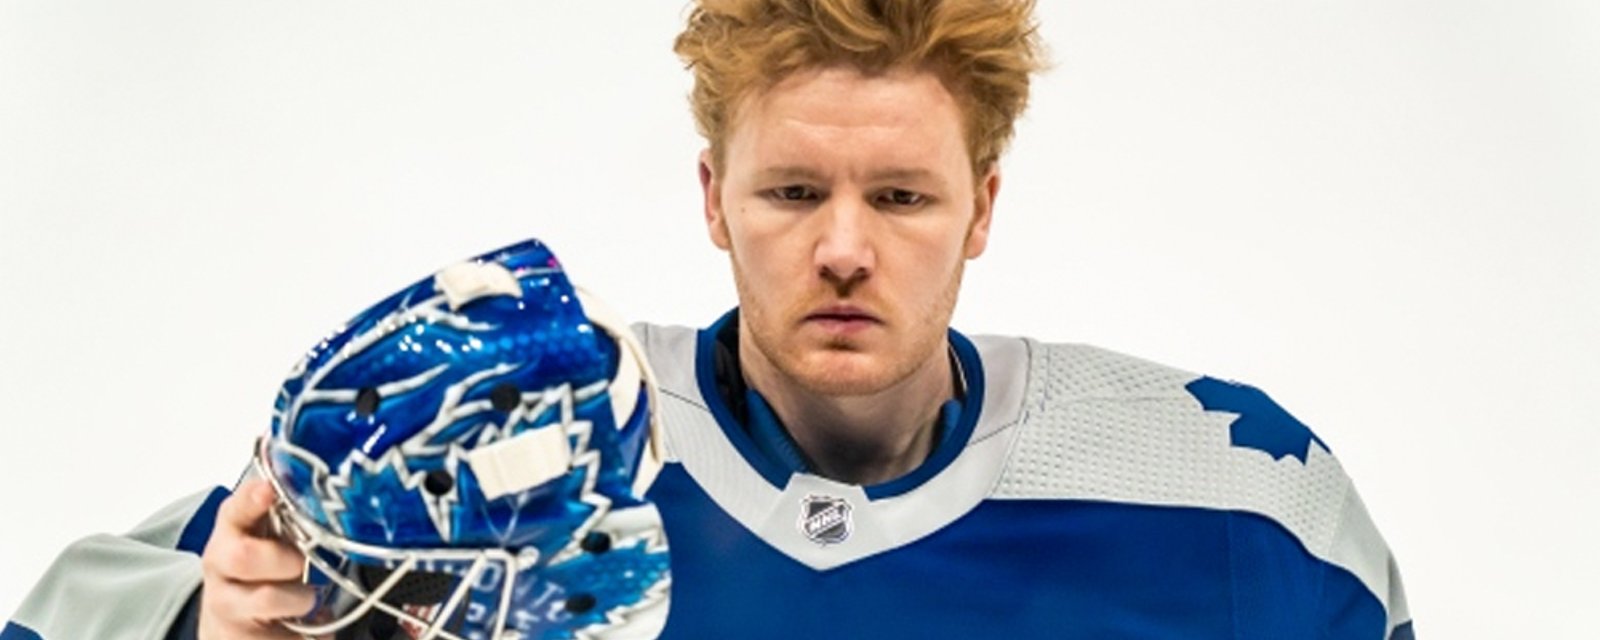 Frederik Andersen opens up on his final season with the Leafs and moving on as a free agent